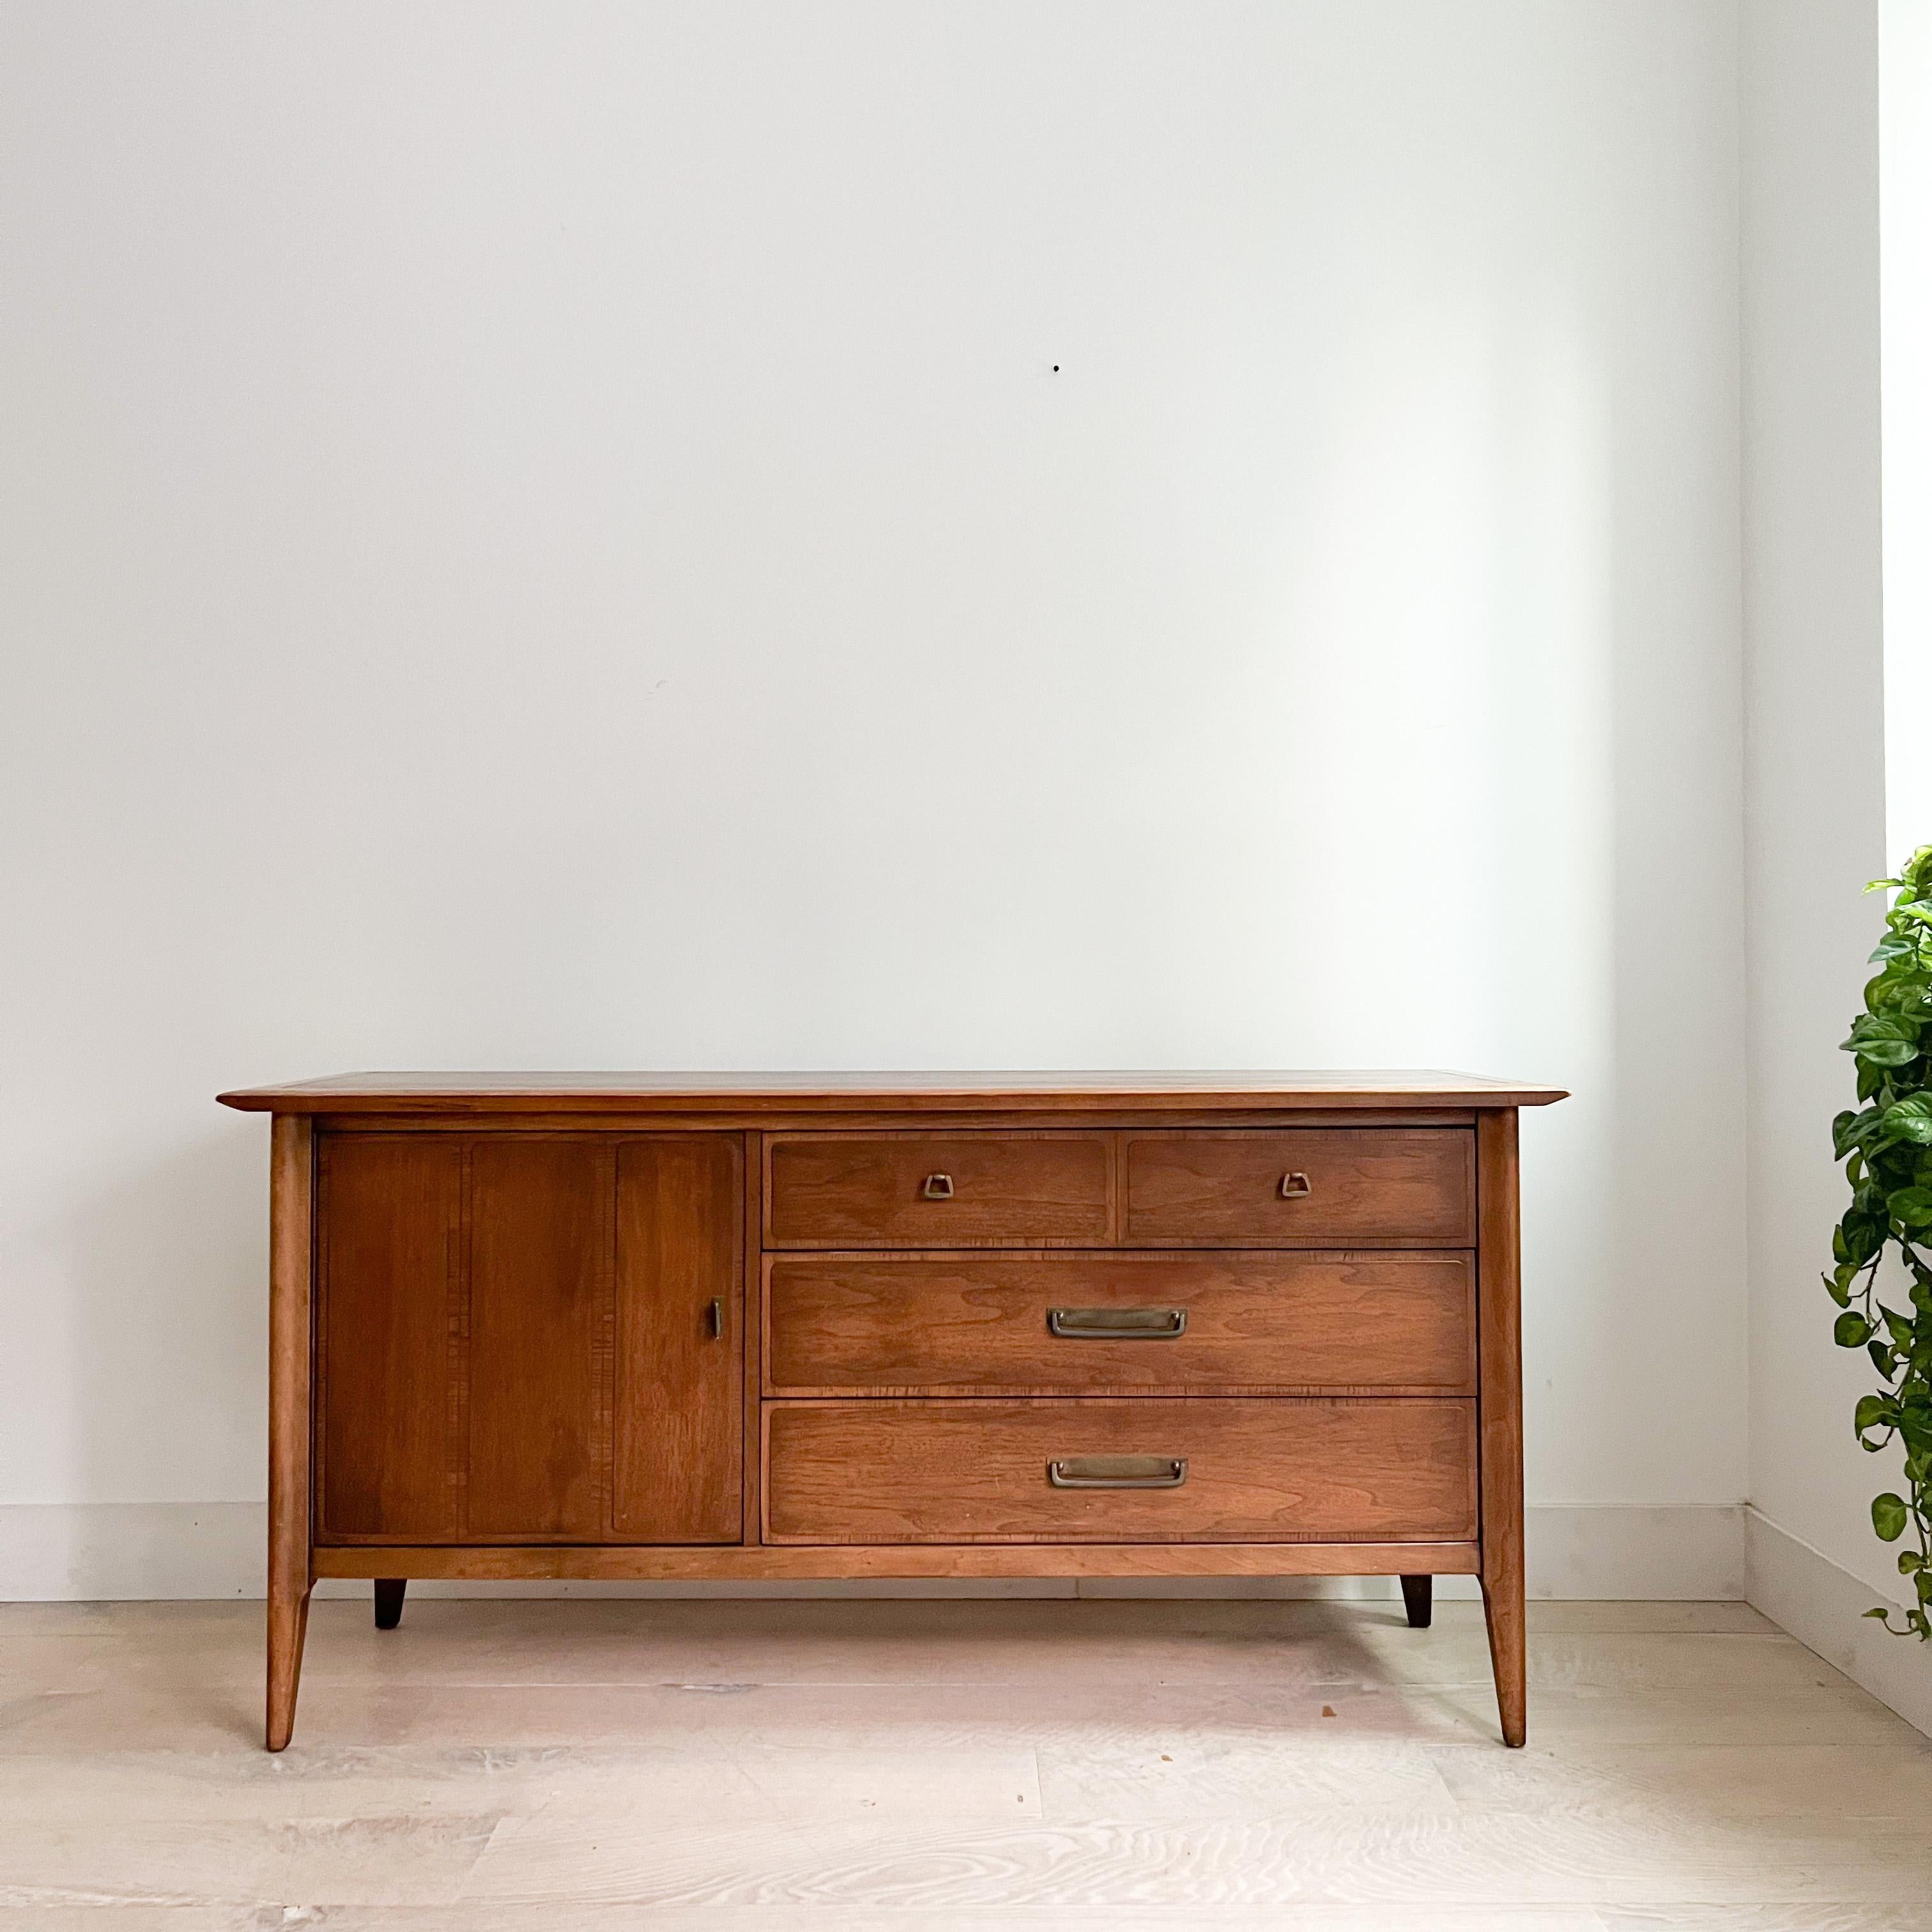 Discover the allure of mid-century modern design with this exquisite walnut buffet by Lane. Its top has been sanded and restored, revealing the rich, natural beauty of the walnut wood.

While this buffet showcases the elegance of mid-century style,